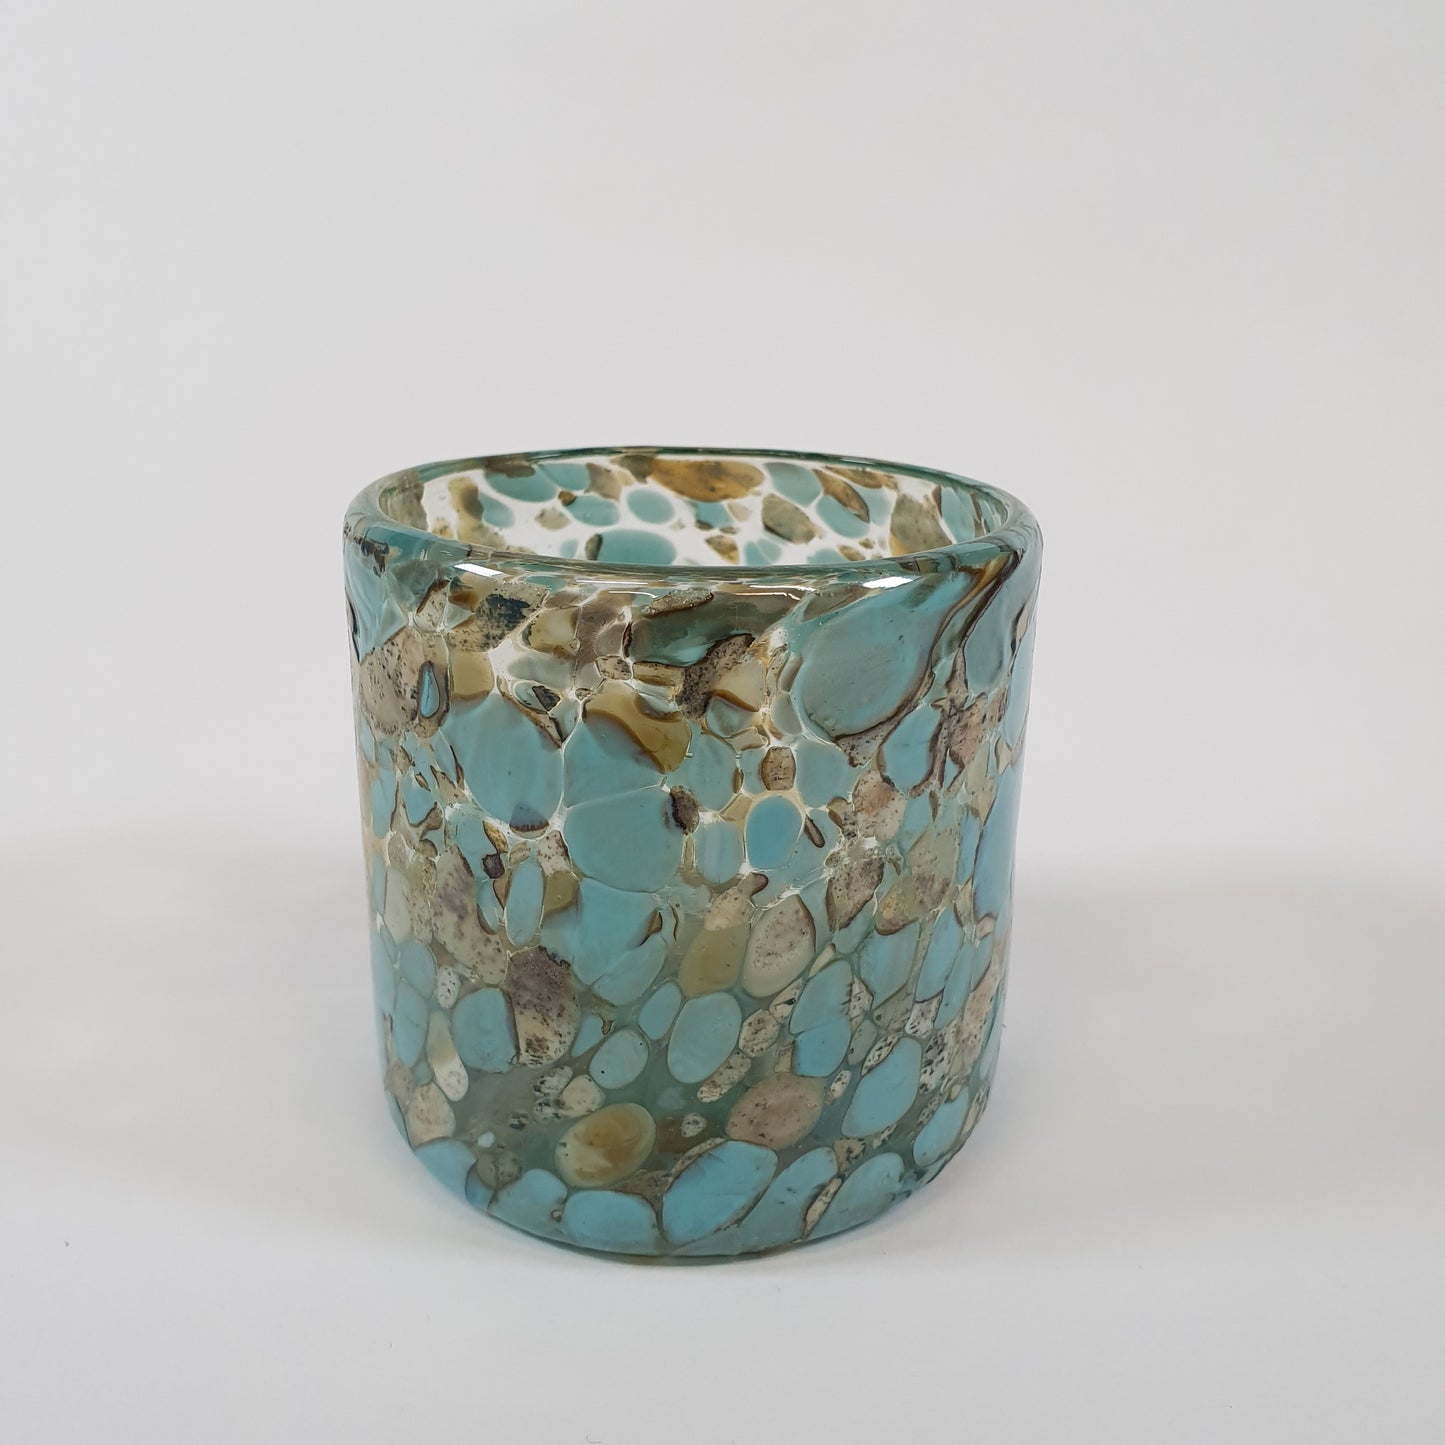 Sirena Turquoise Edition Turquoise & Marble Tumbler / Mexican drinking glass / Hand-blown from recycled glass